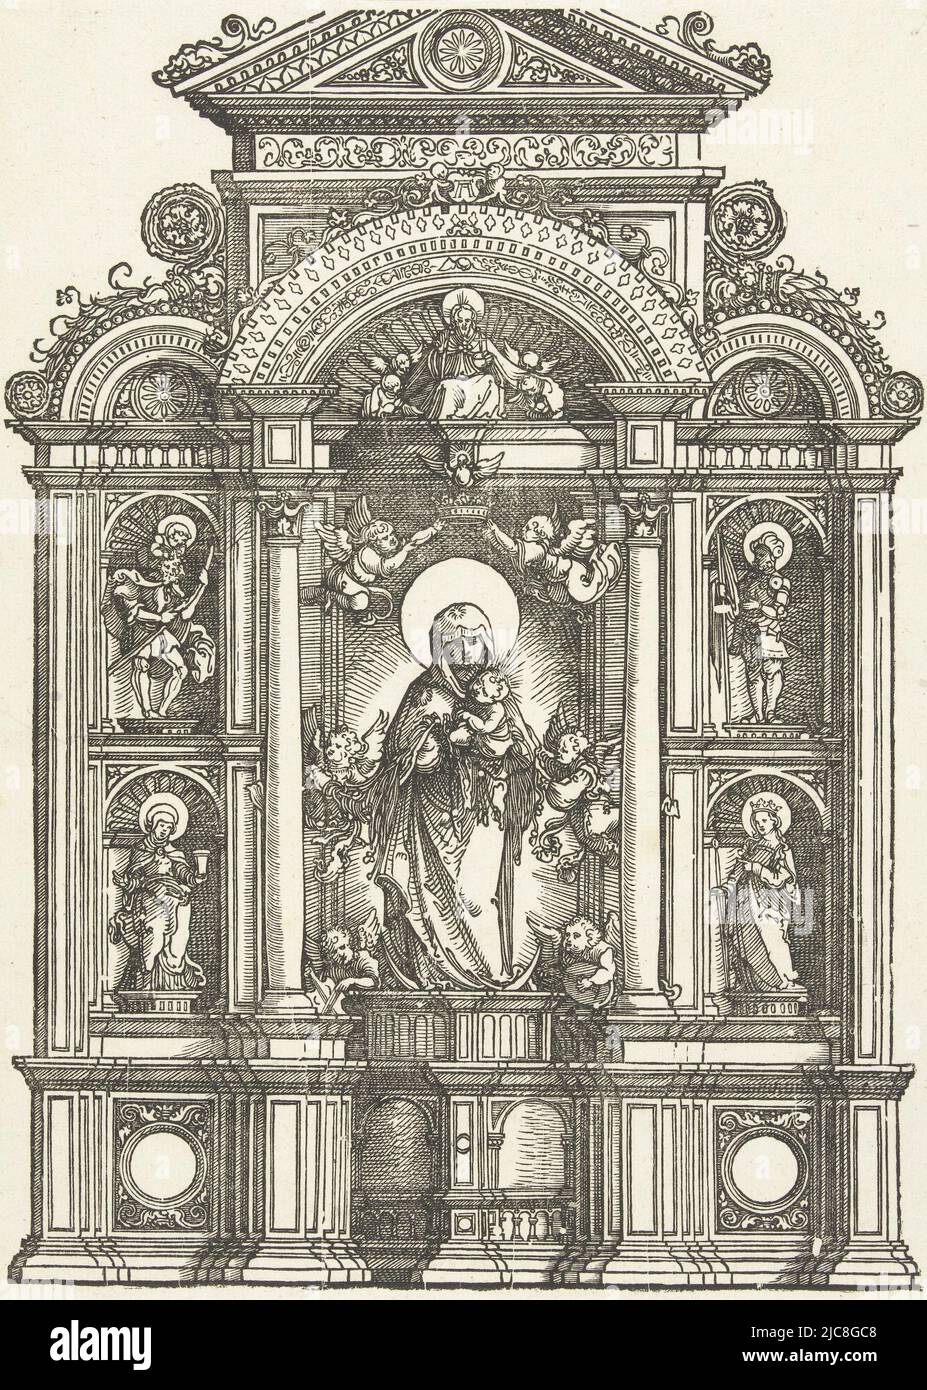 An altar centered on Mary with the Christ Child in a niche, surrounded by six angels, two of whom hold a crown over her head. Above them are the Holy Spirit and God the Father. To the left, Saint Christopher and Mary Magdalene in a niche, to the right, Saint Florian and Saint Catherine. Altar with Mary and Child Altar of the Schne Maria von Regensburg, print maker: Albrecht Altdorfer, (mentioned on object), Germany, c. 1506 - 1538, paper, h 305 mm × w 235 mm Stock Photo